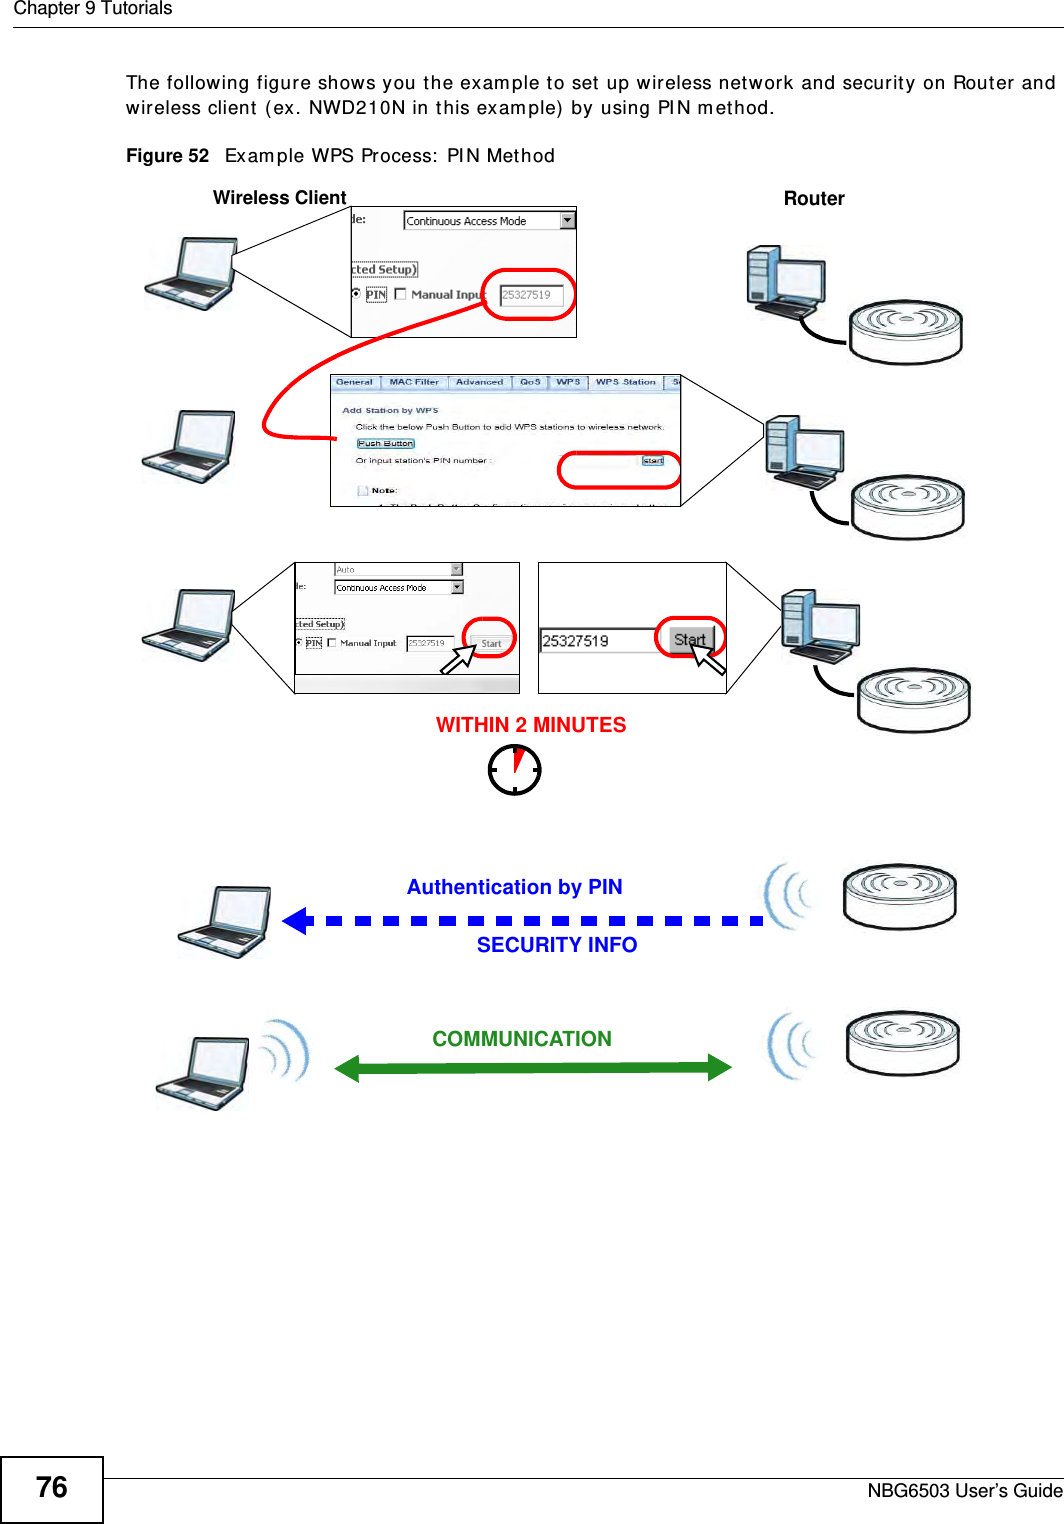 Chapter 9 TutorialsNBG6503 User’s Guide76The following figure shows you the example to set up wireless network and security on Router and wireless client (ex. NWD210N in this example) by using PIN method. Figure 52   Example WPS Process: PIN MethodAuthentication by PINSECURITY INFOWITHIN 2 MINUTESWireless ClientRouterCOMMUNICATION